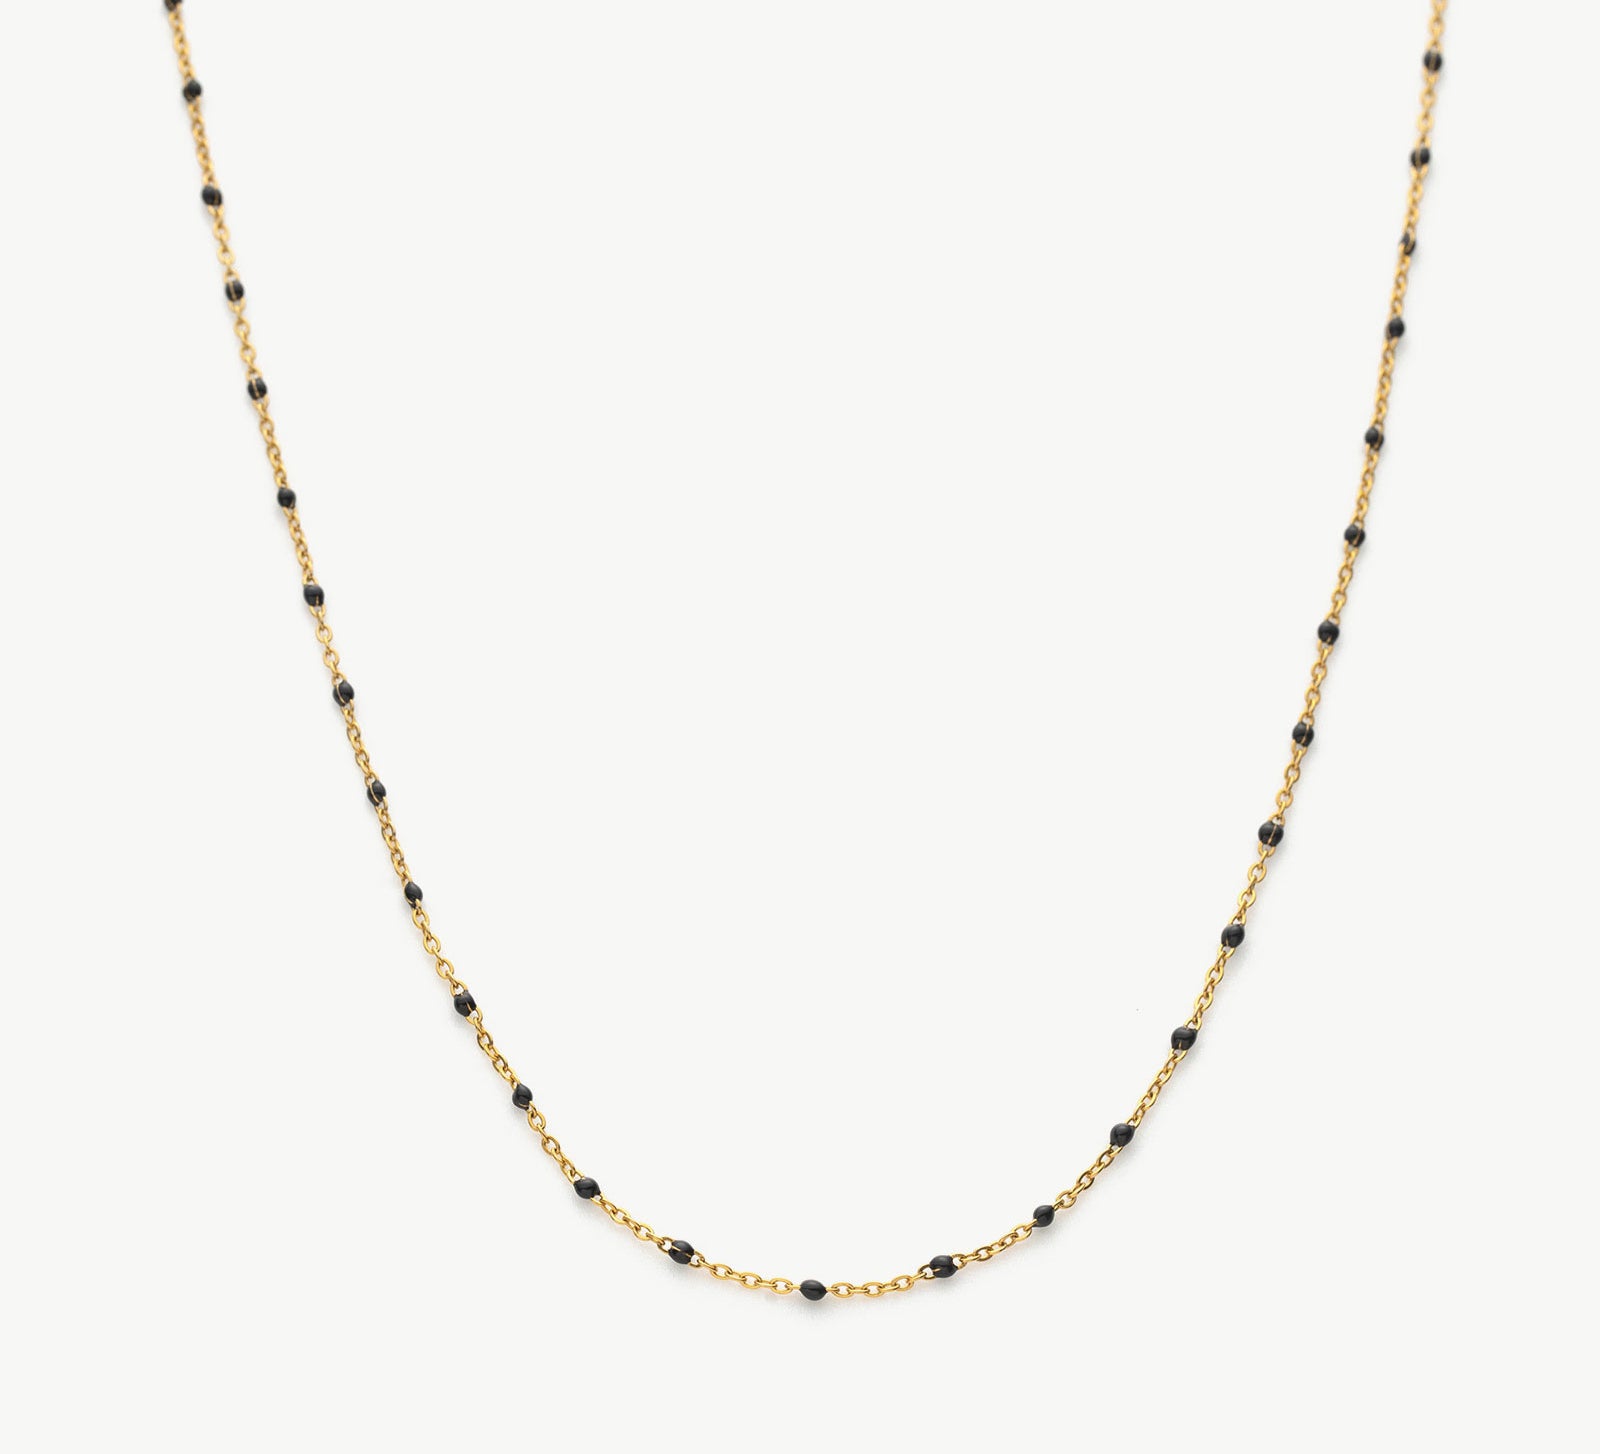 Beads Chain Necklace, a bohemian-inspired piece featuring a chain adorned with an array of colorful beads, creating a harmonious and laid-back accessory for a touch of eclectic style